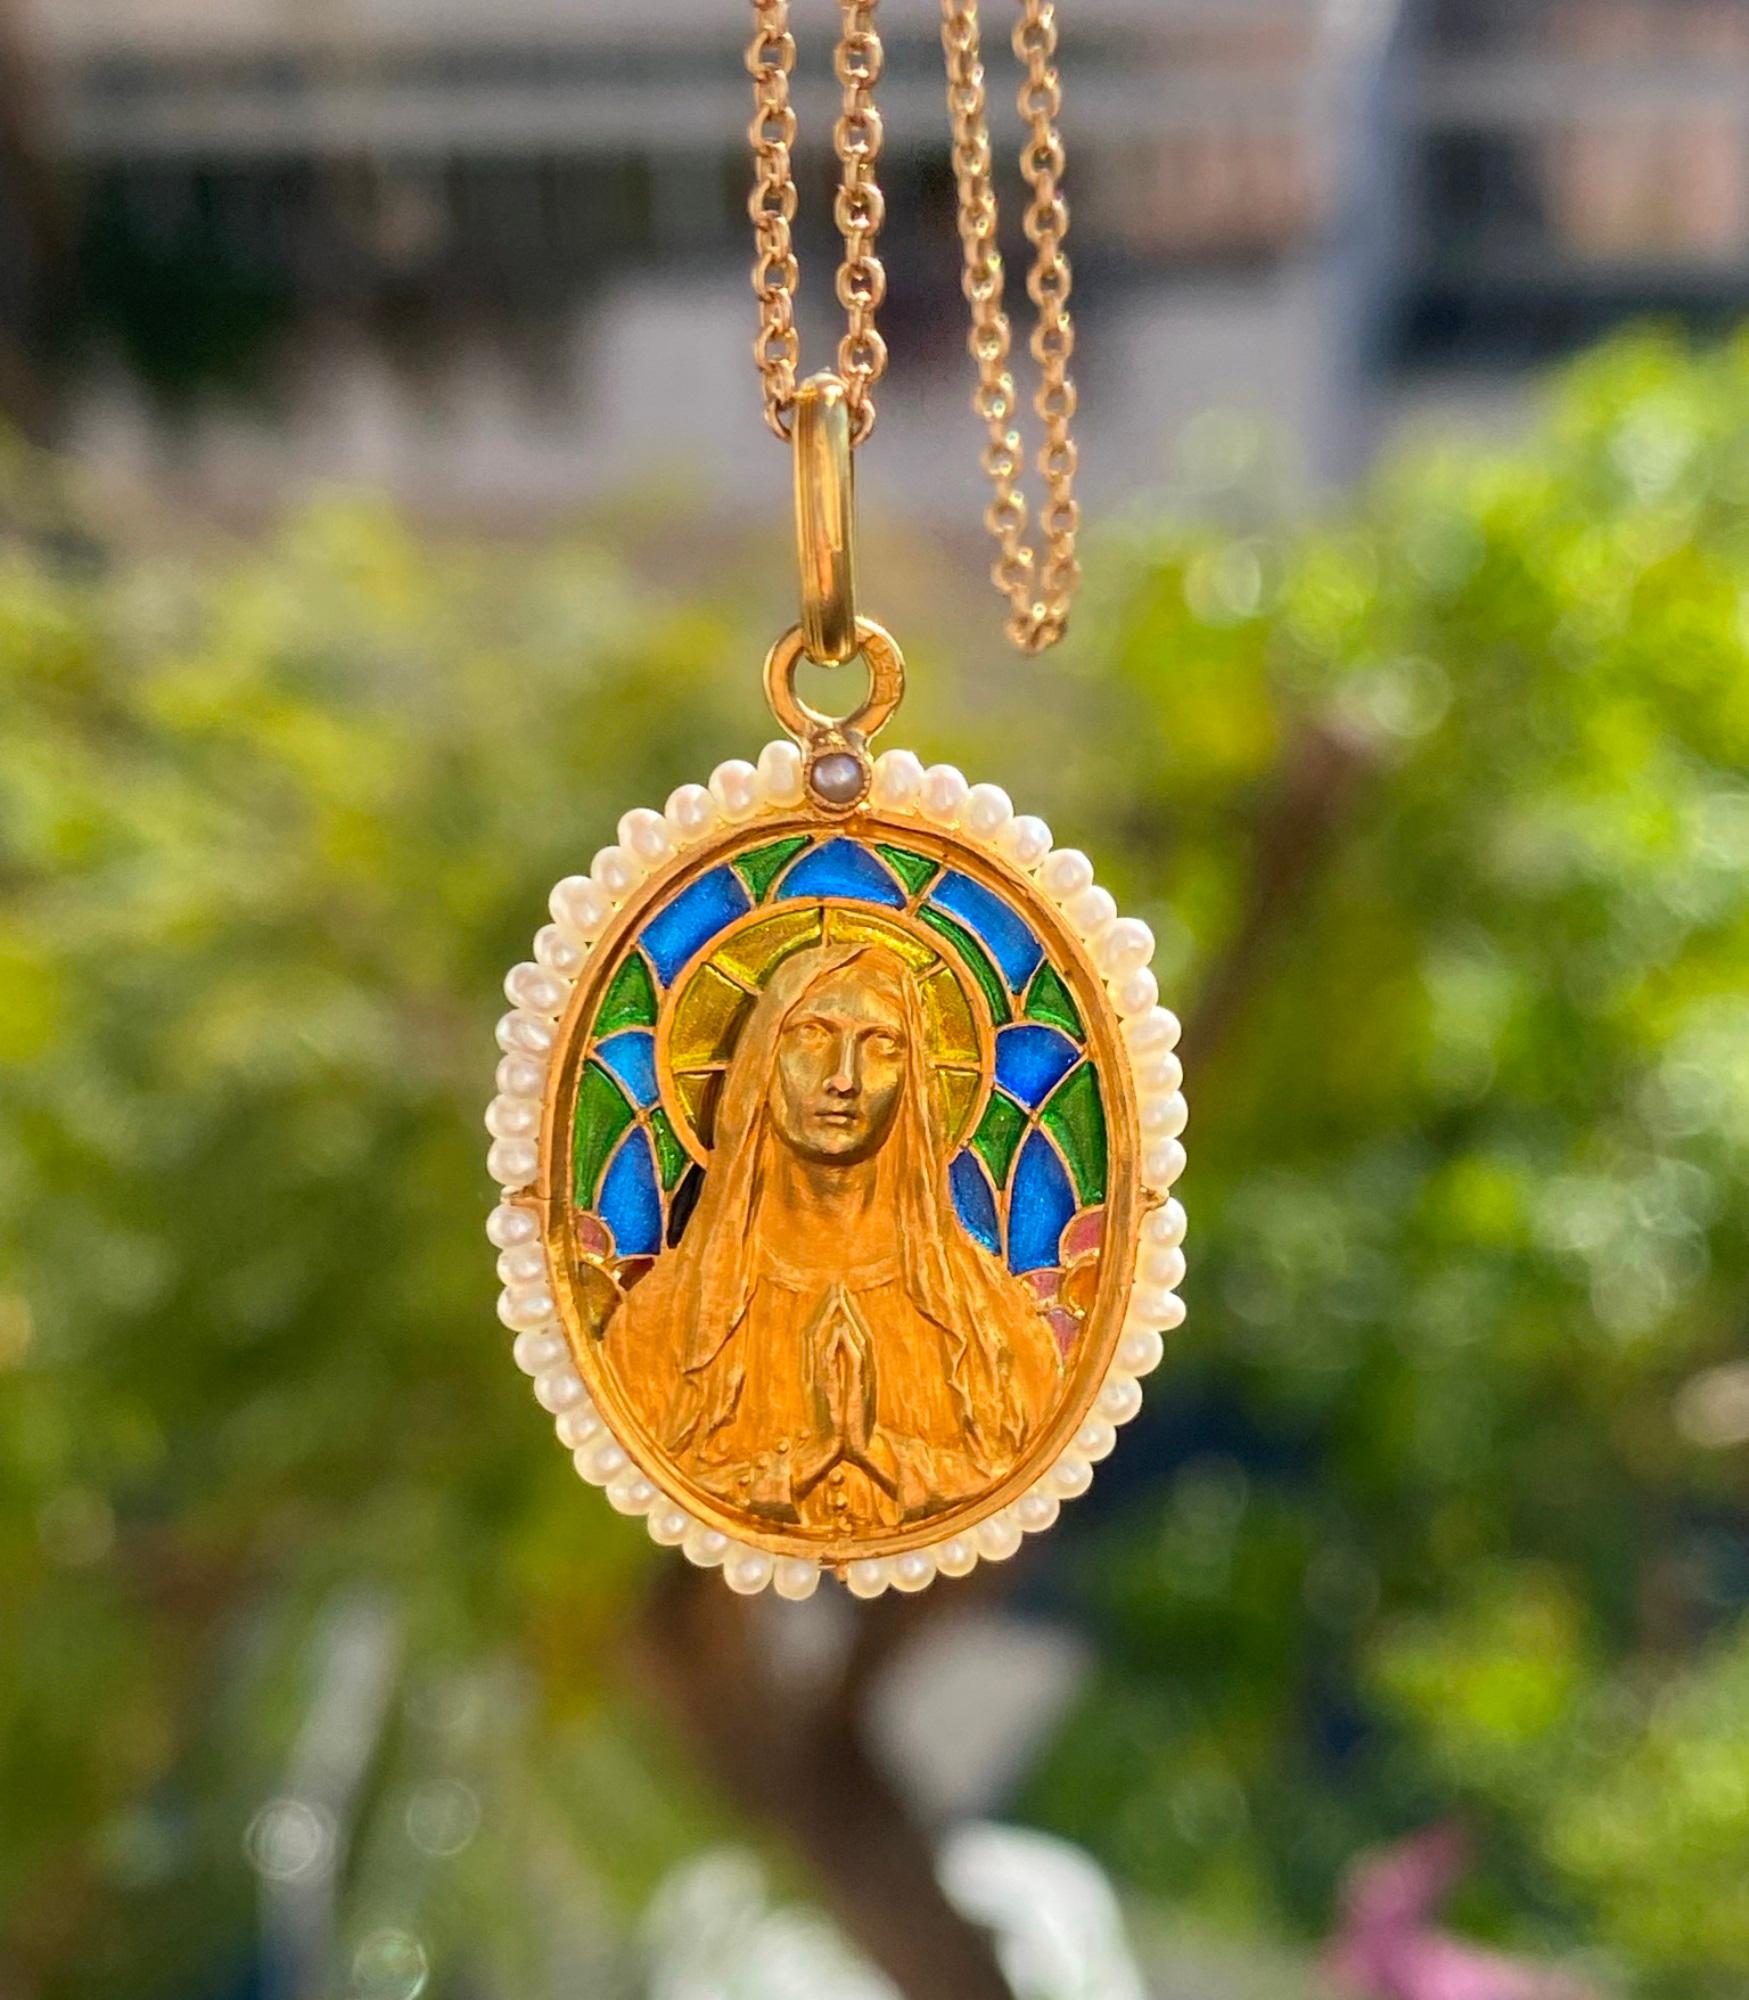 This is a beautiful antique religious pendant of the Virgin Mary in detailed high relief gold.  The pendant has 4 colors of plique a jour blue, green, orange and gold. There is a halo of seed pearls around the pendant.  There is a Russian gold